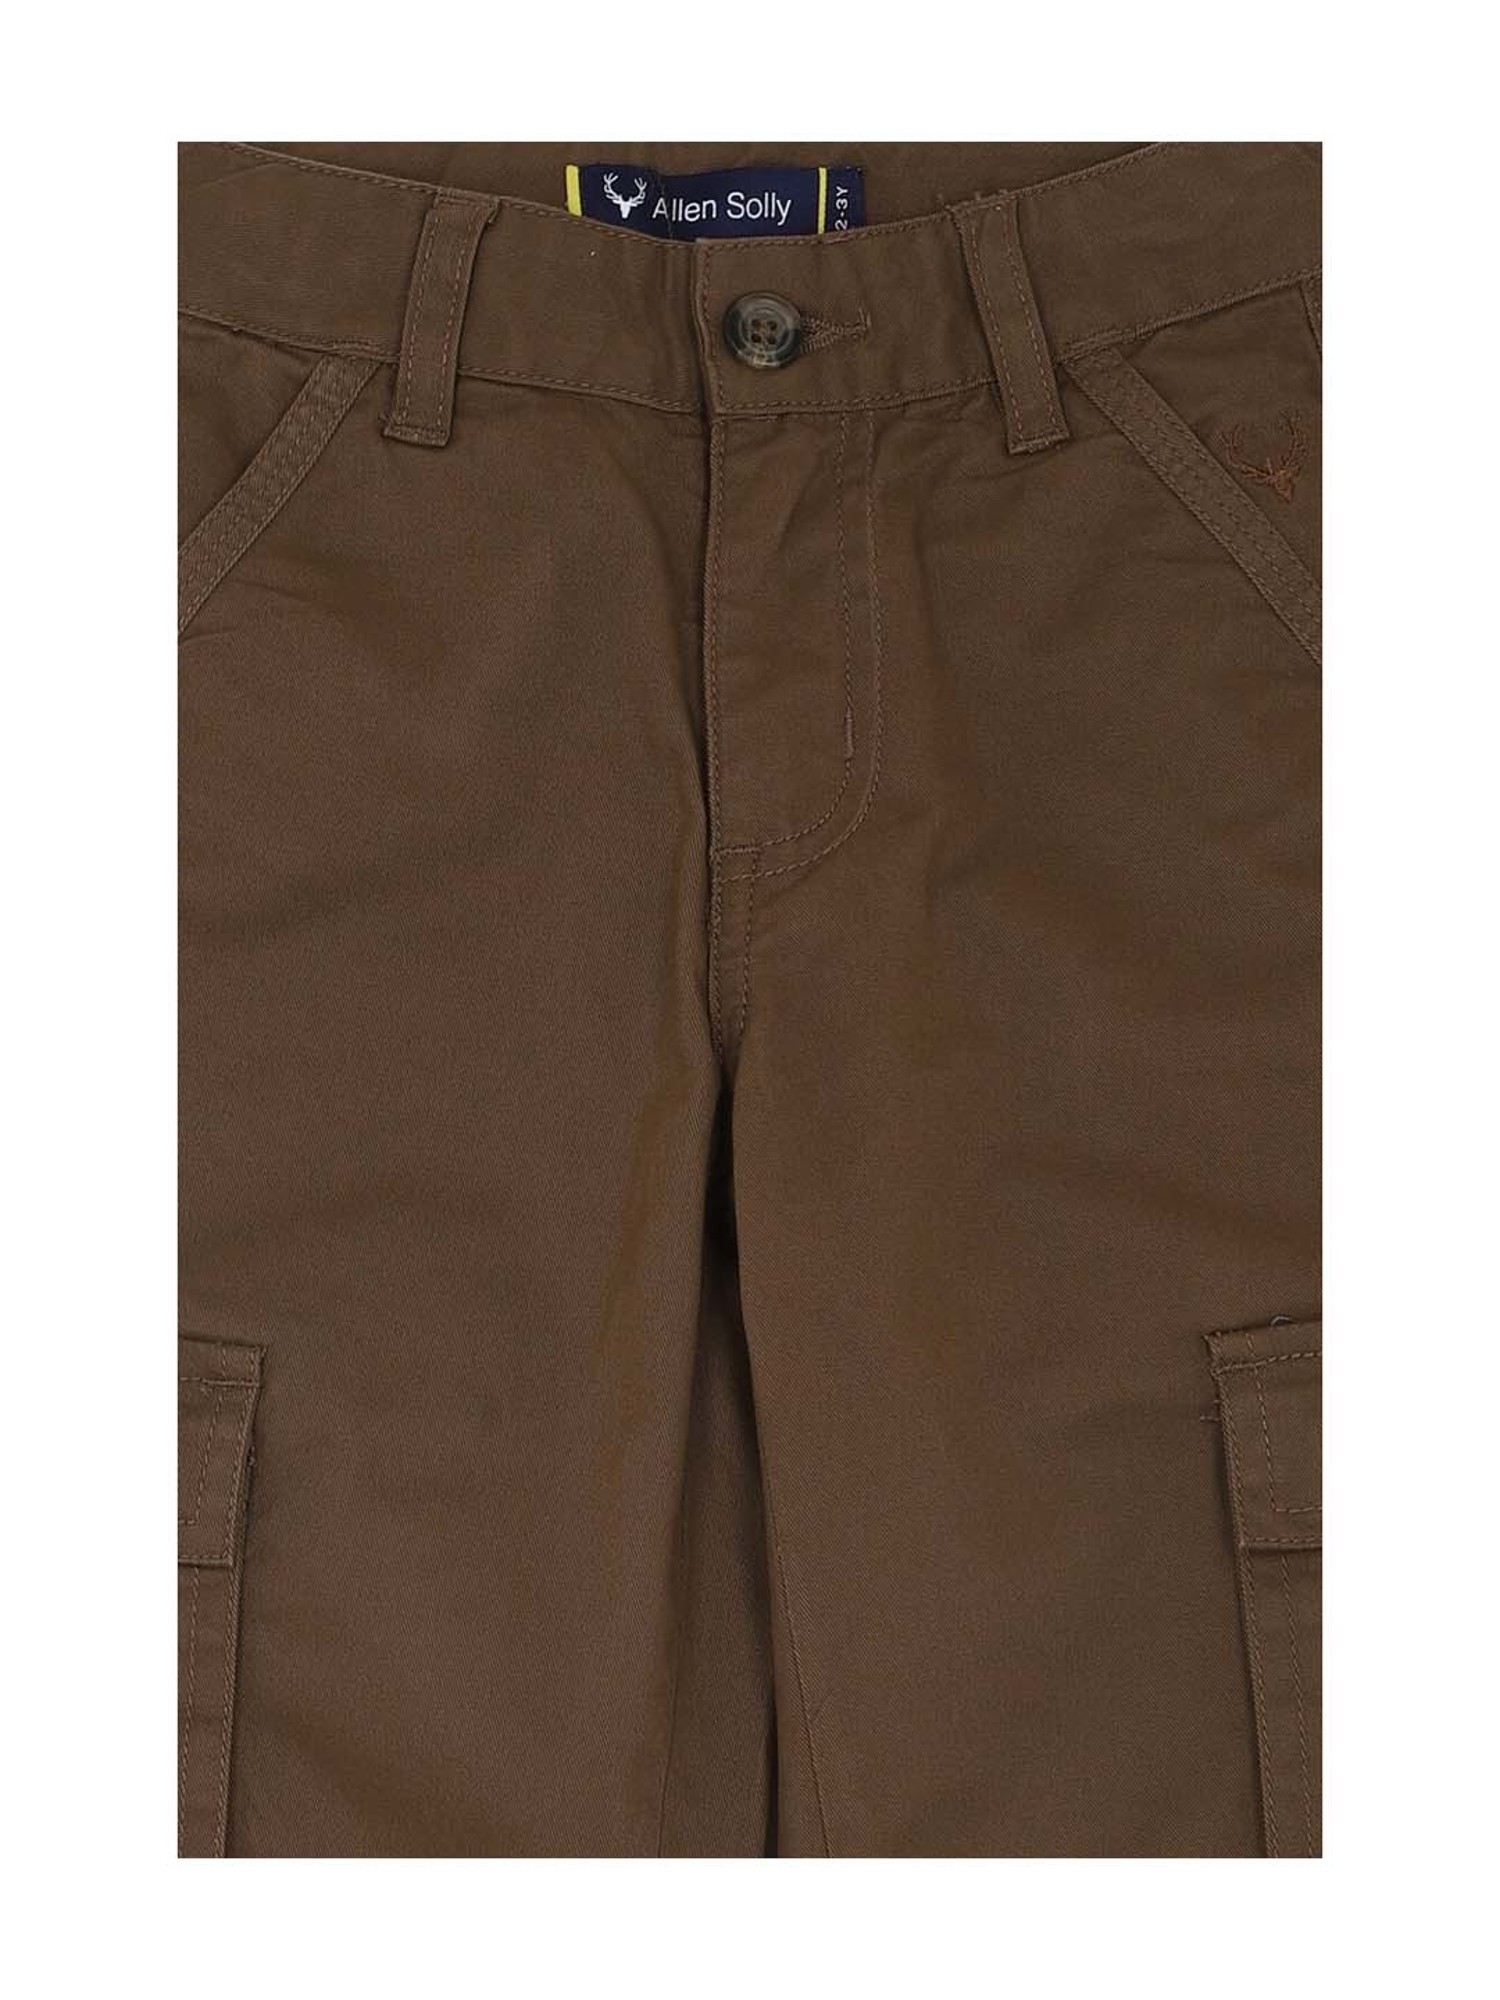 Buy Allen Solly Trousers Online At Best Price Offers In India